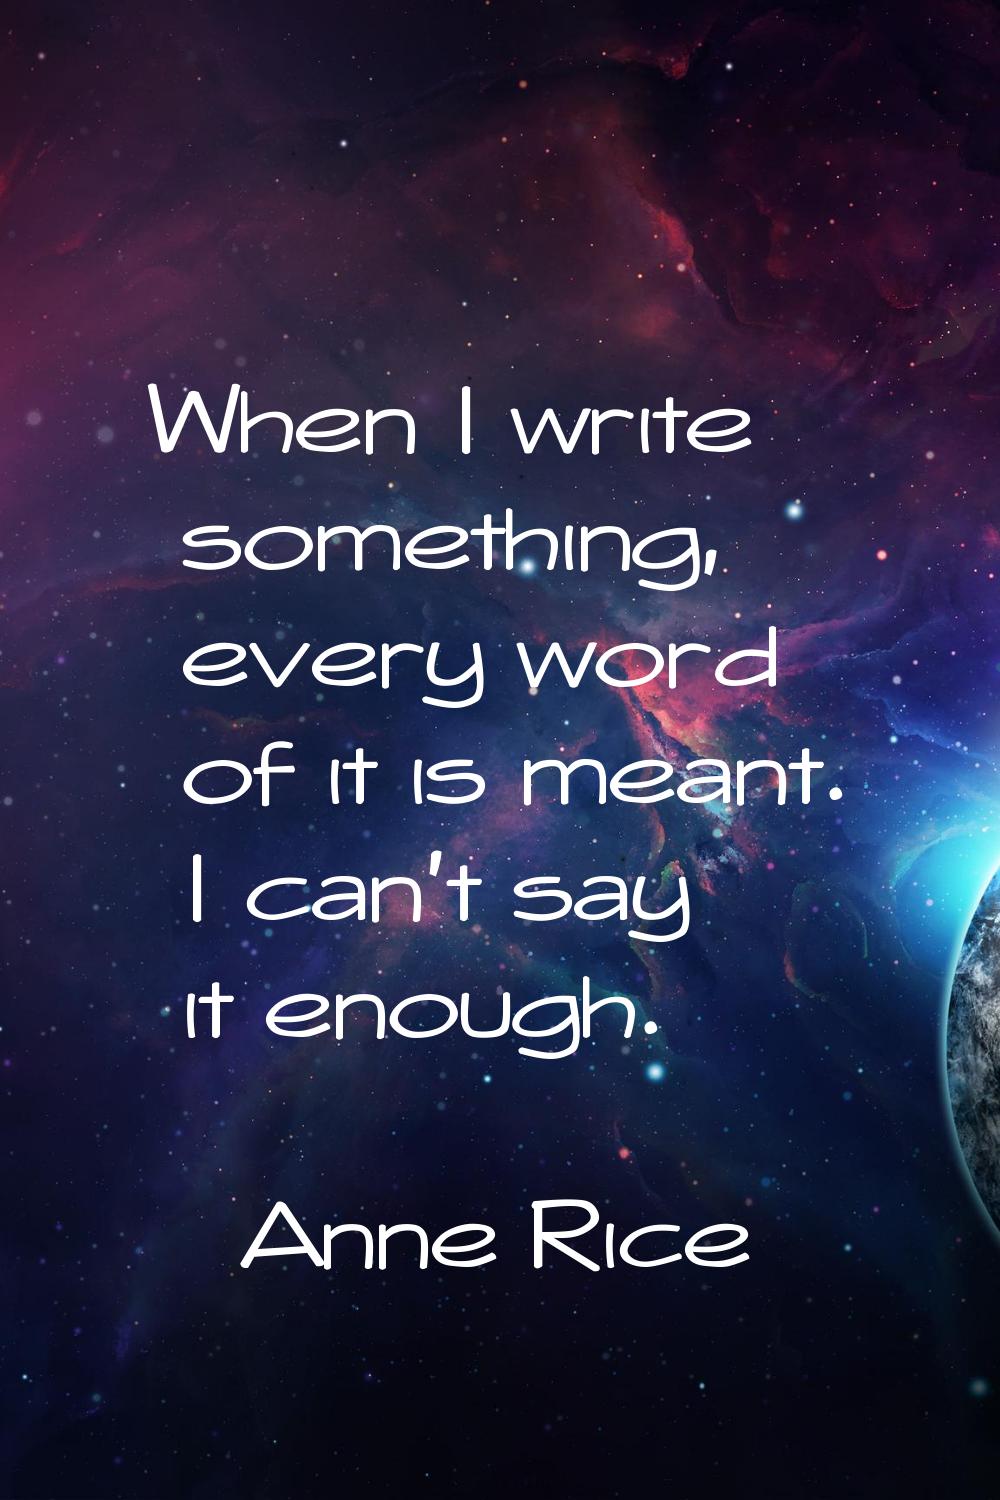 When I write something, every word of it is meant. I can't say it enough.